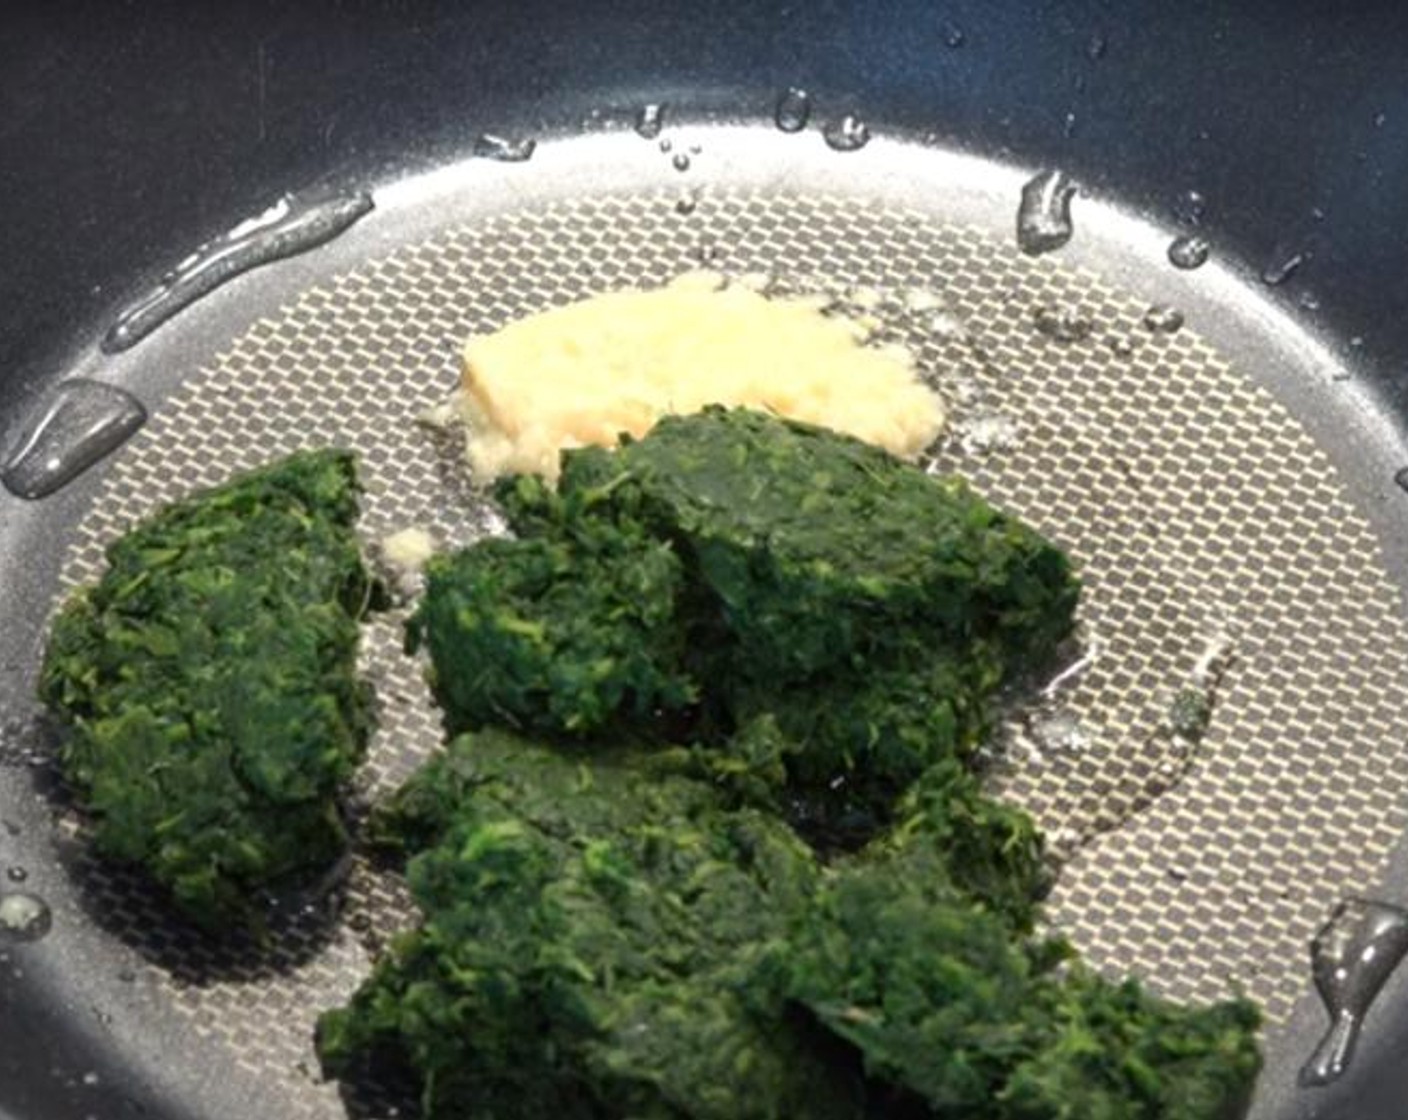 step 1 Pour Olive Oil (as needed) into a frying pan over medium heat. Add Garlic (1 clove) and Frozen Spinach (1 2/3 cups). Stir around for about 2-3 minutes, or until any excess liquid has evaporated.